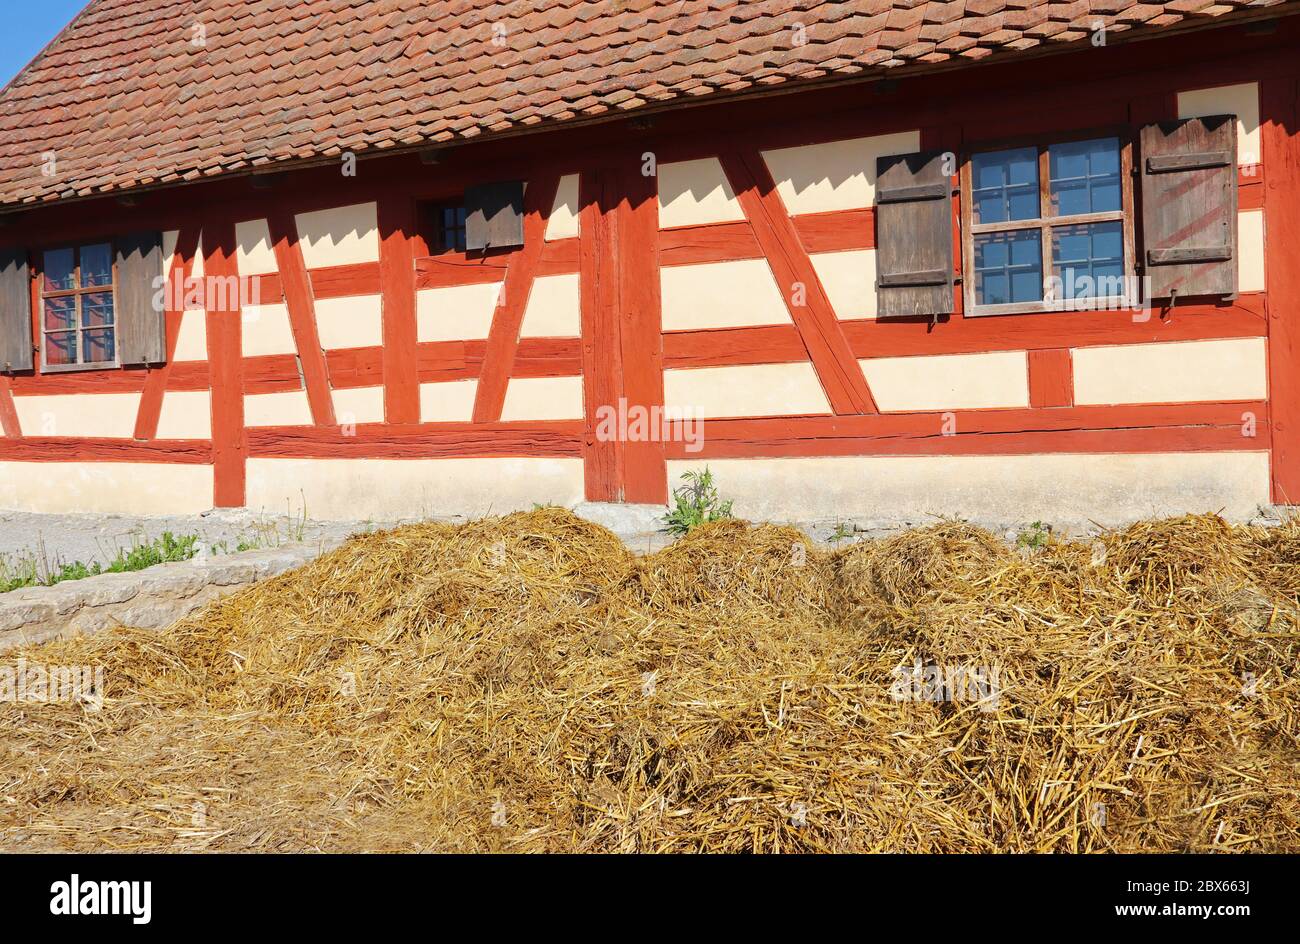 dung heap in front of an old timbered farmhouse with red painted beams, shutters and a dung heap in front of it Stock Photo